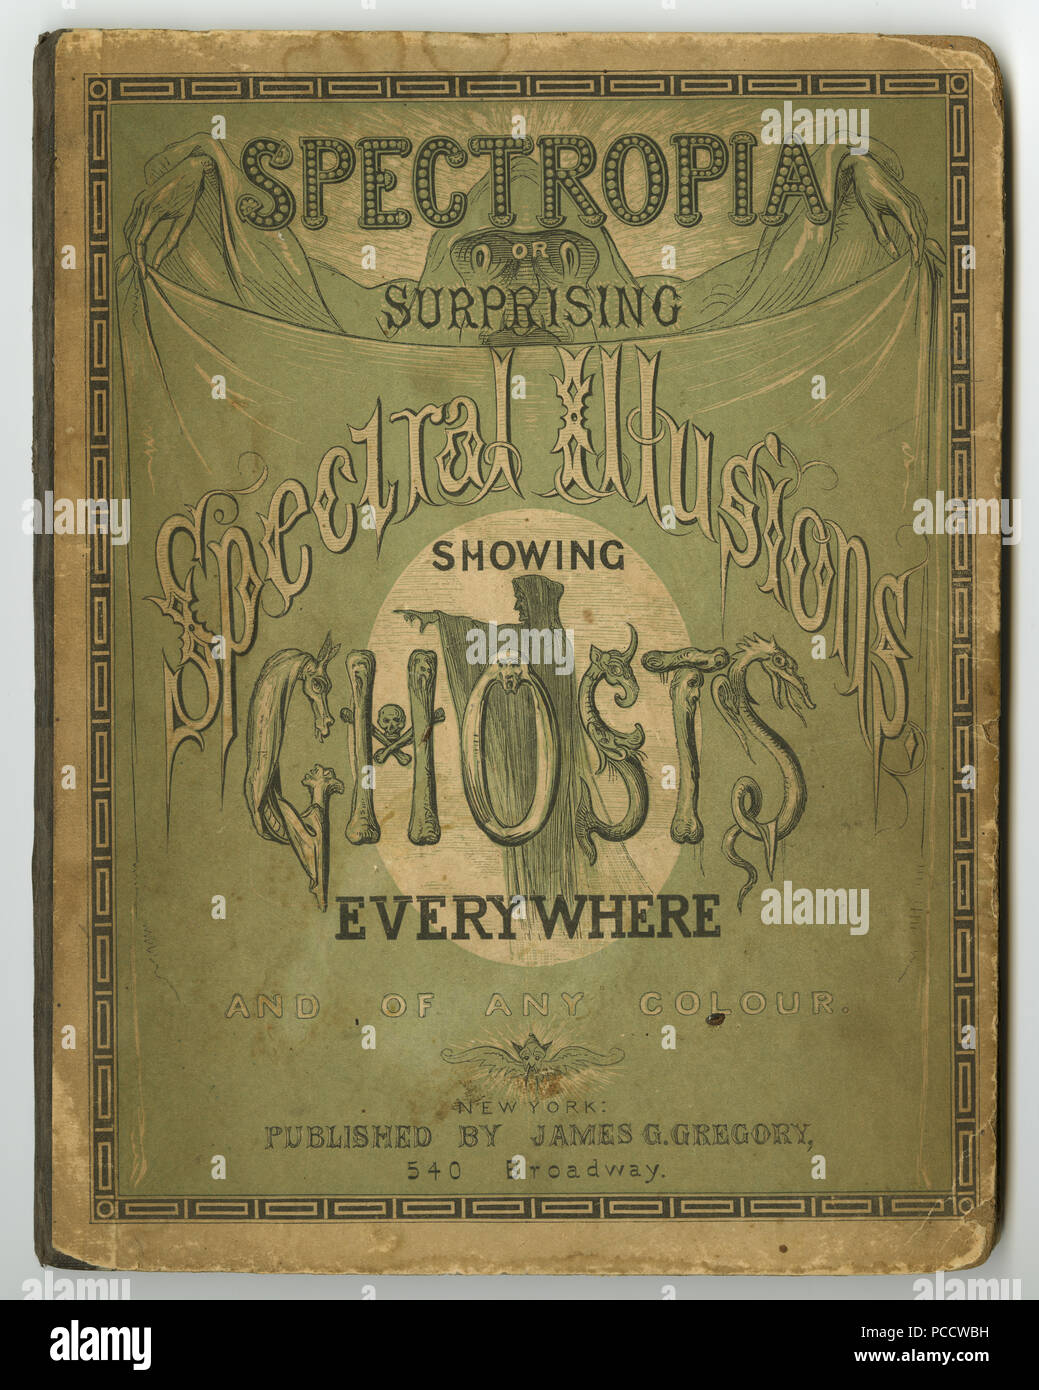 Spectropia, or Surprising Spectral Illusions: Showing Ghosts Everywhere, and of any Colour Stock Photo